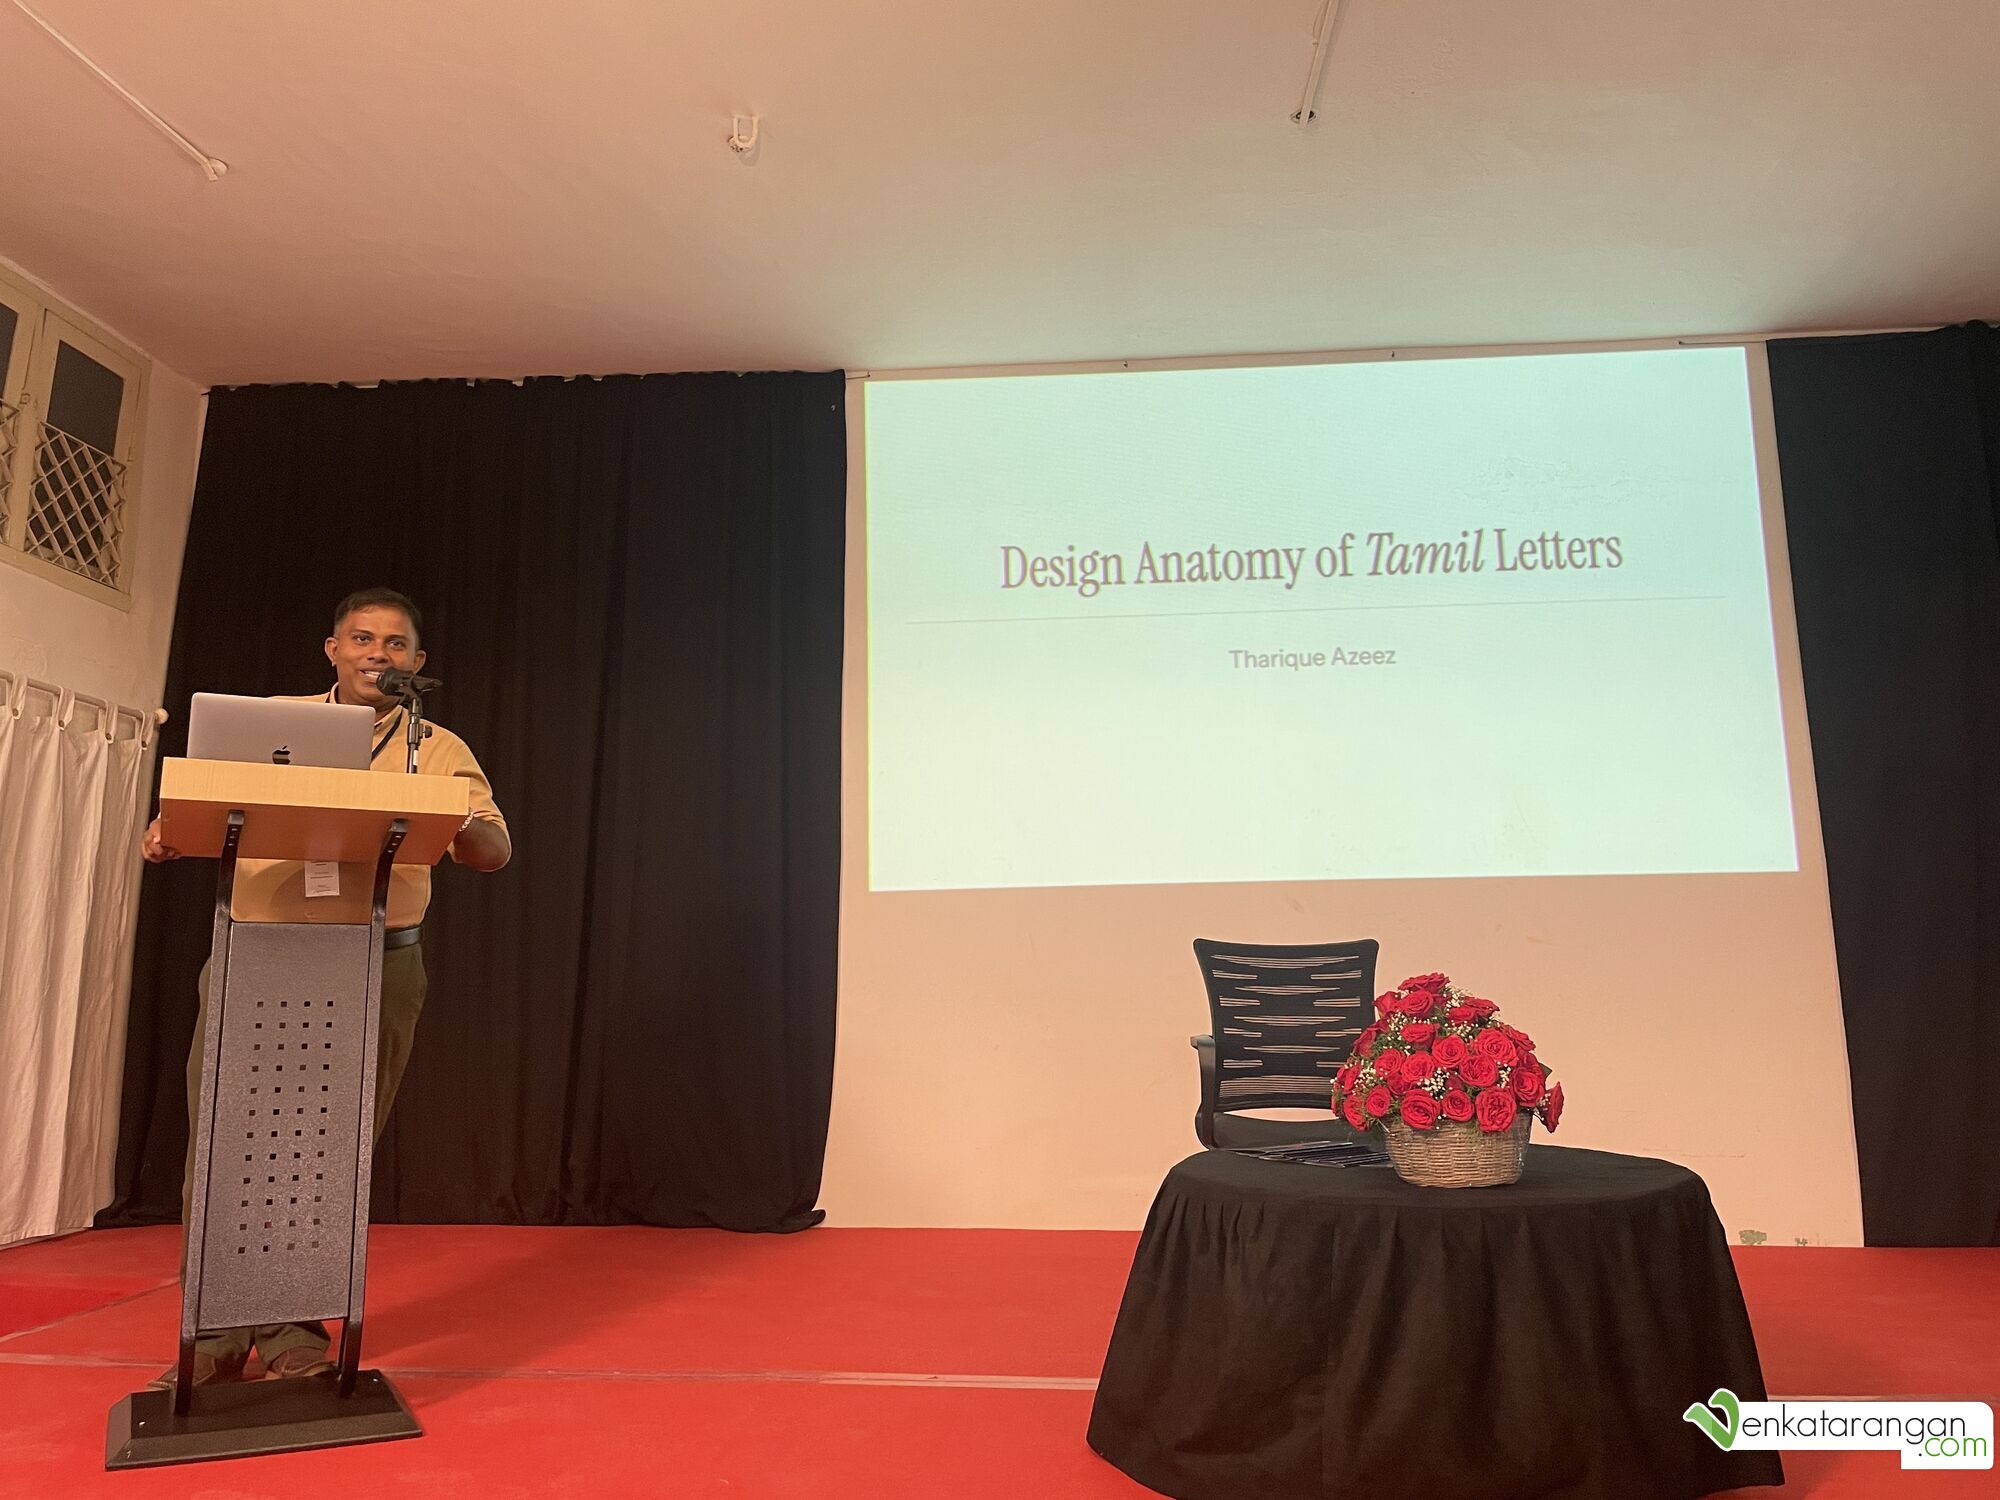 Mr. Tharique Azeez - Anatomy of Tamil letters